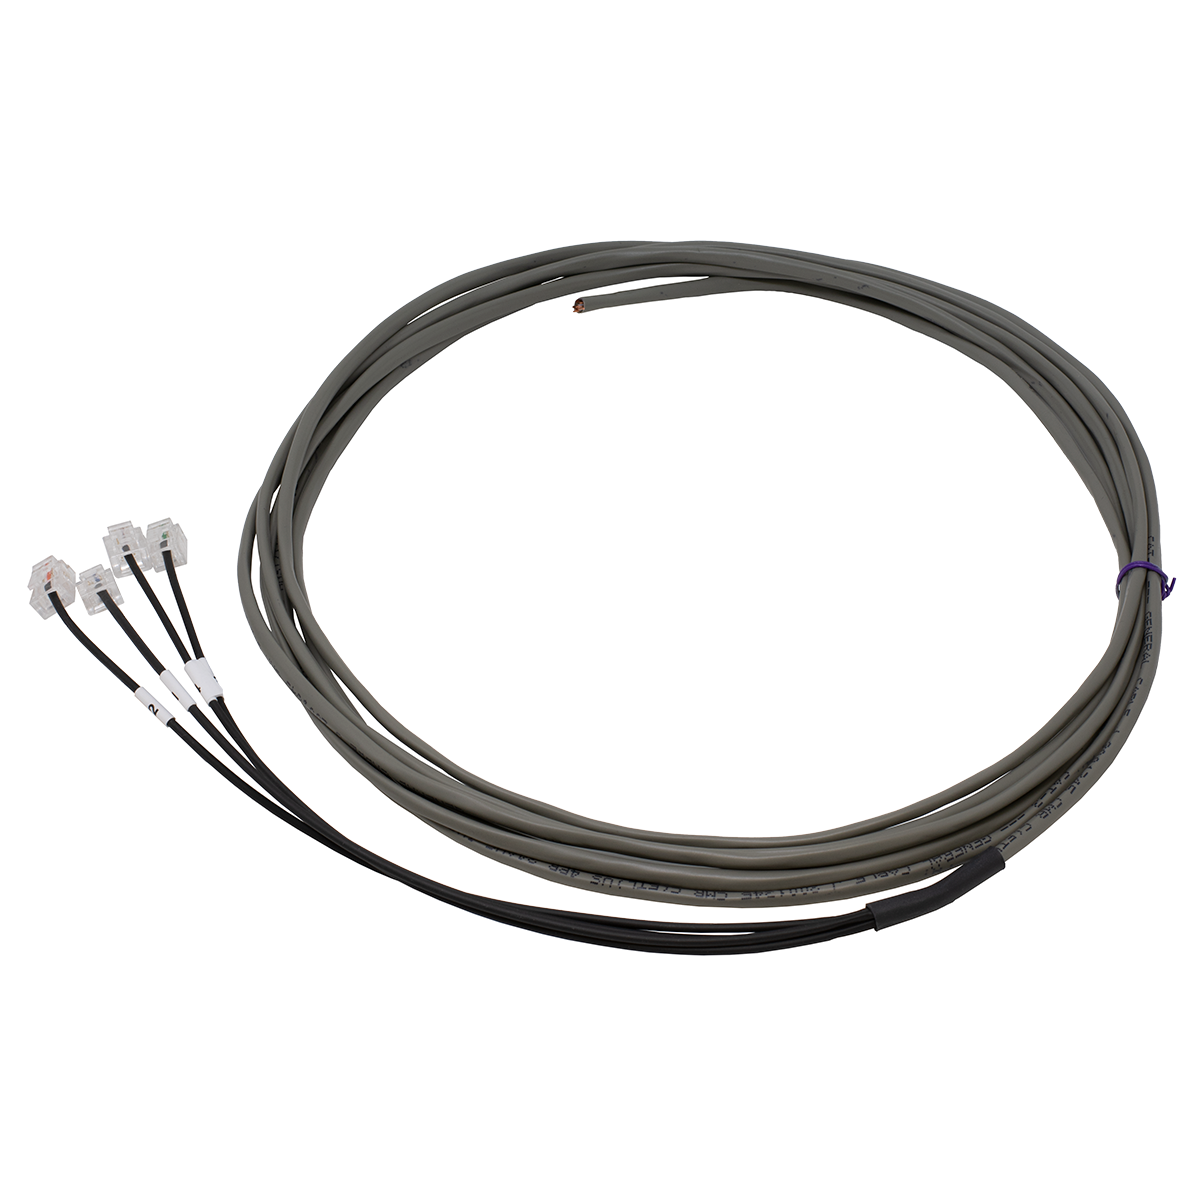 QWIK 15' 4x4 RJ-45 to Blunt Cable